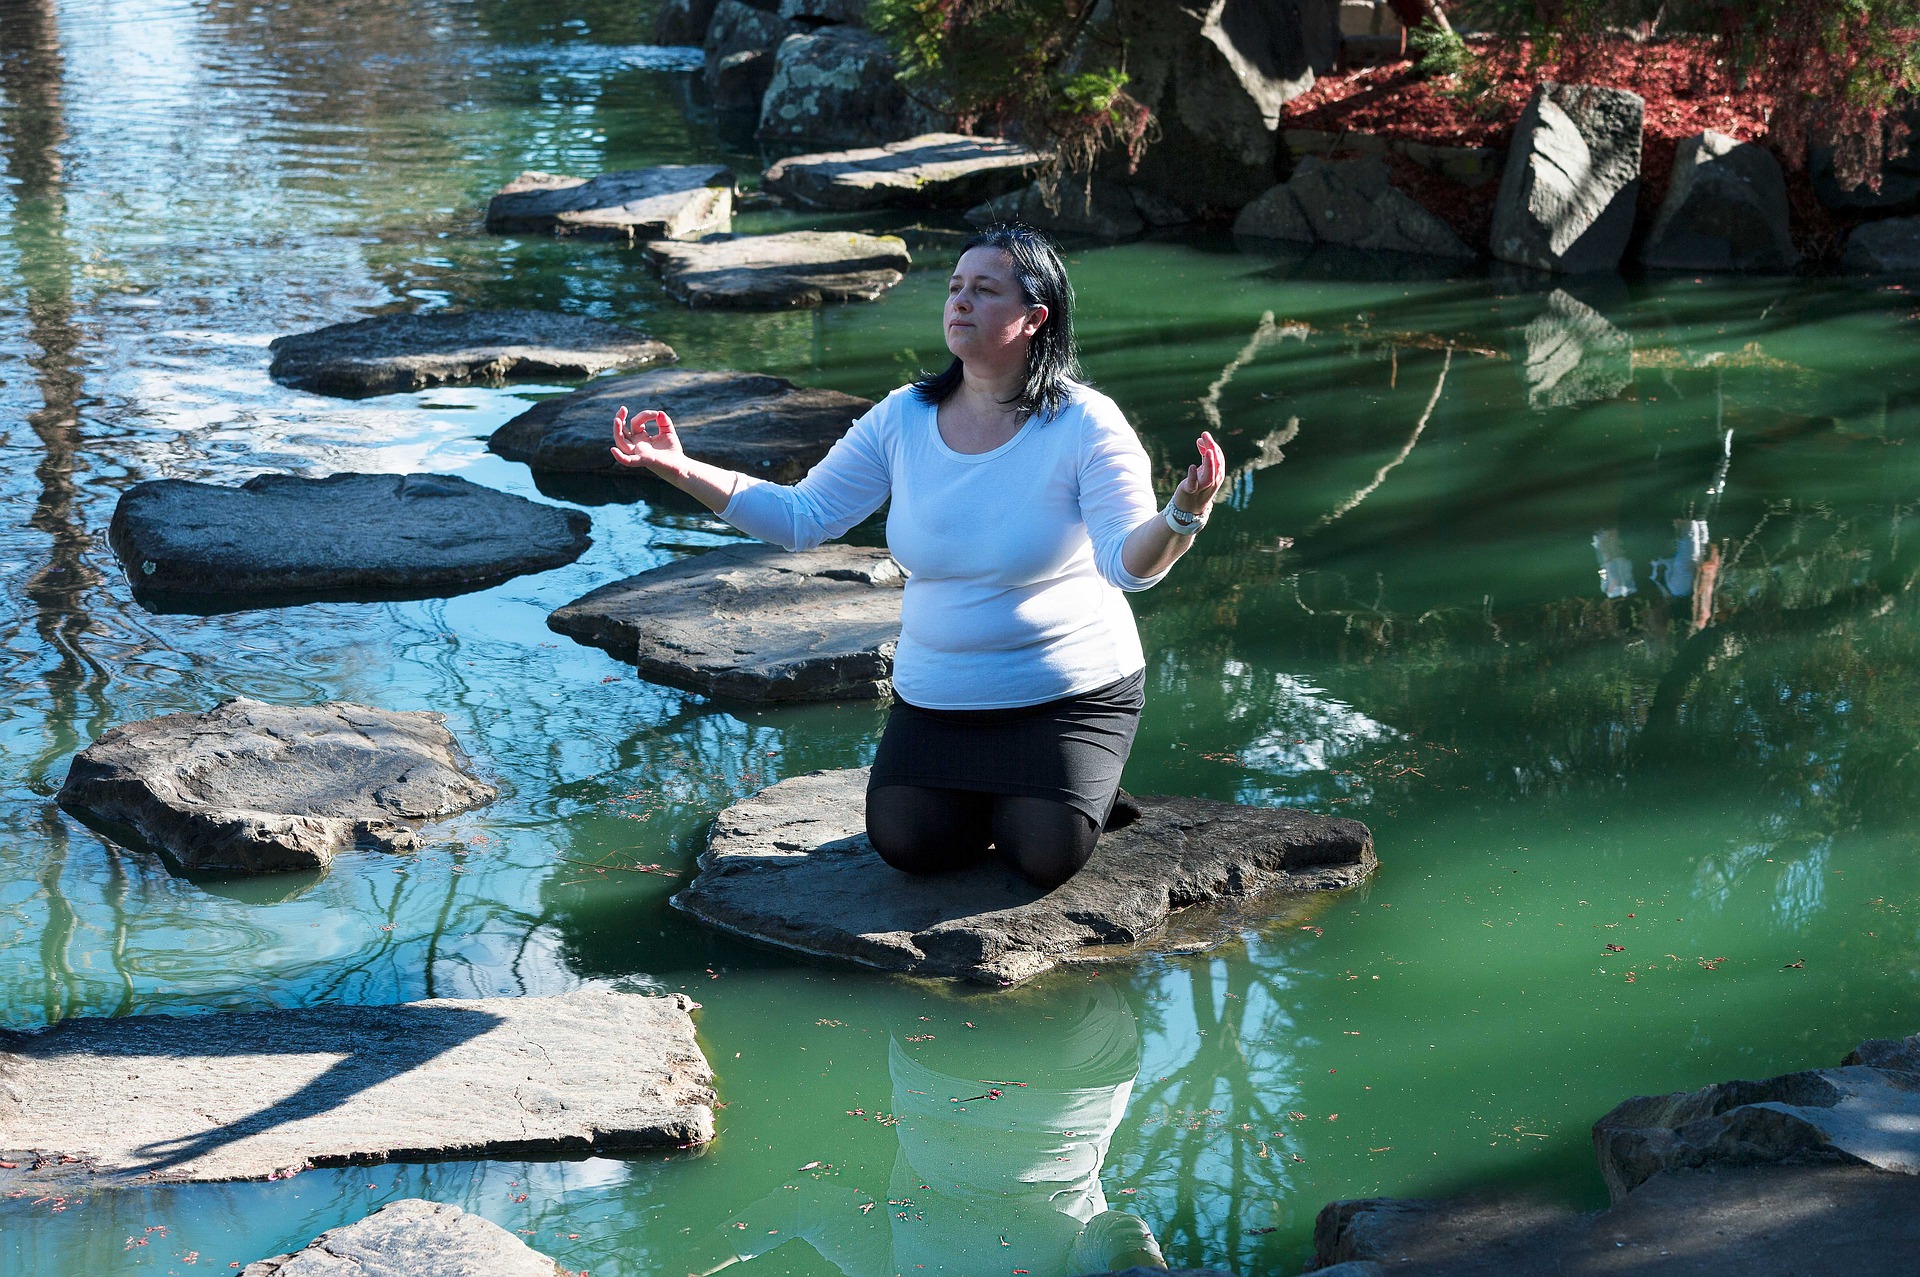 A beautiful pond with large stepping stones. A spiritual woman kneels on one of the stepping stones. Her hands are outstretched and she appears to be communing with the universe.